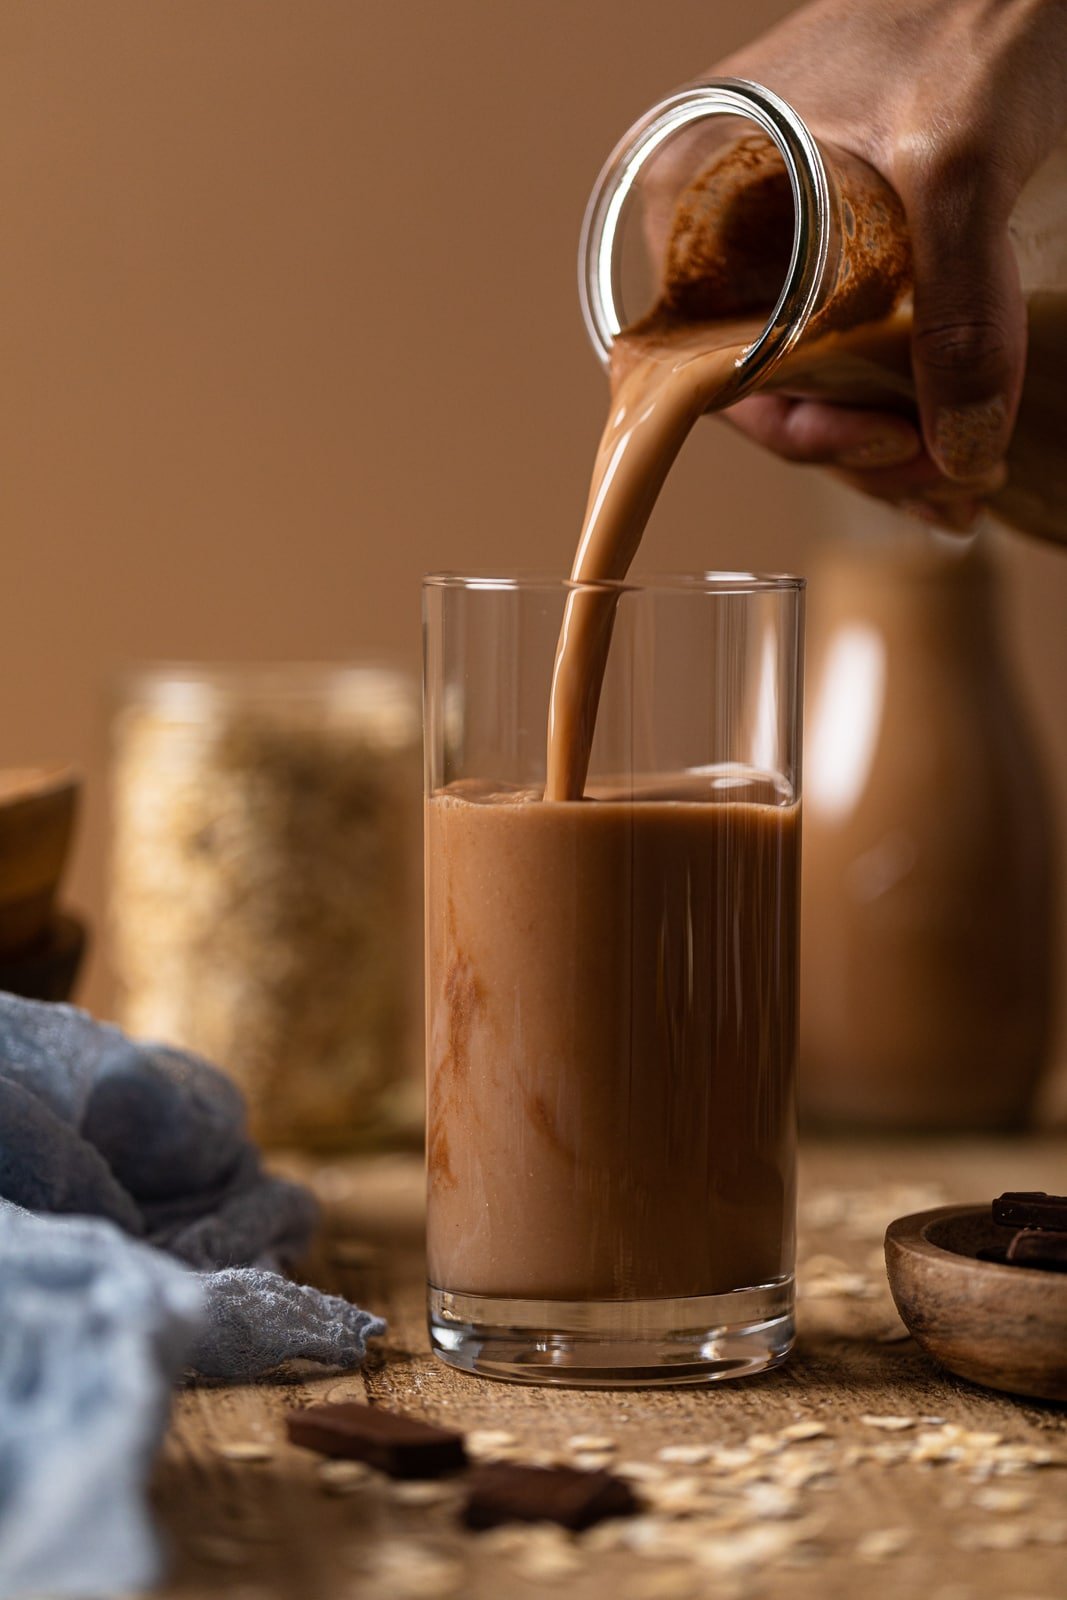 How To Make Chocolate Oat Milk (Non-slimy)